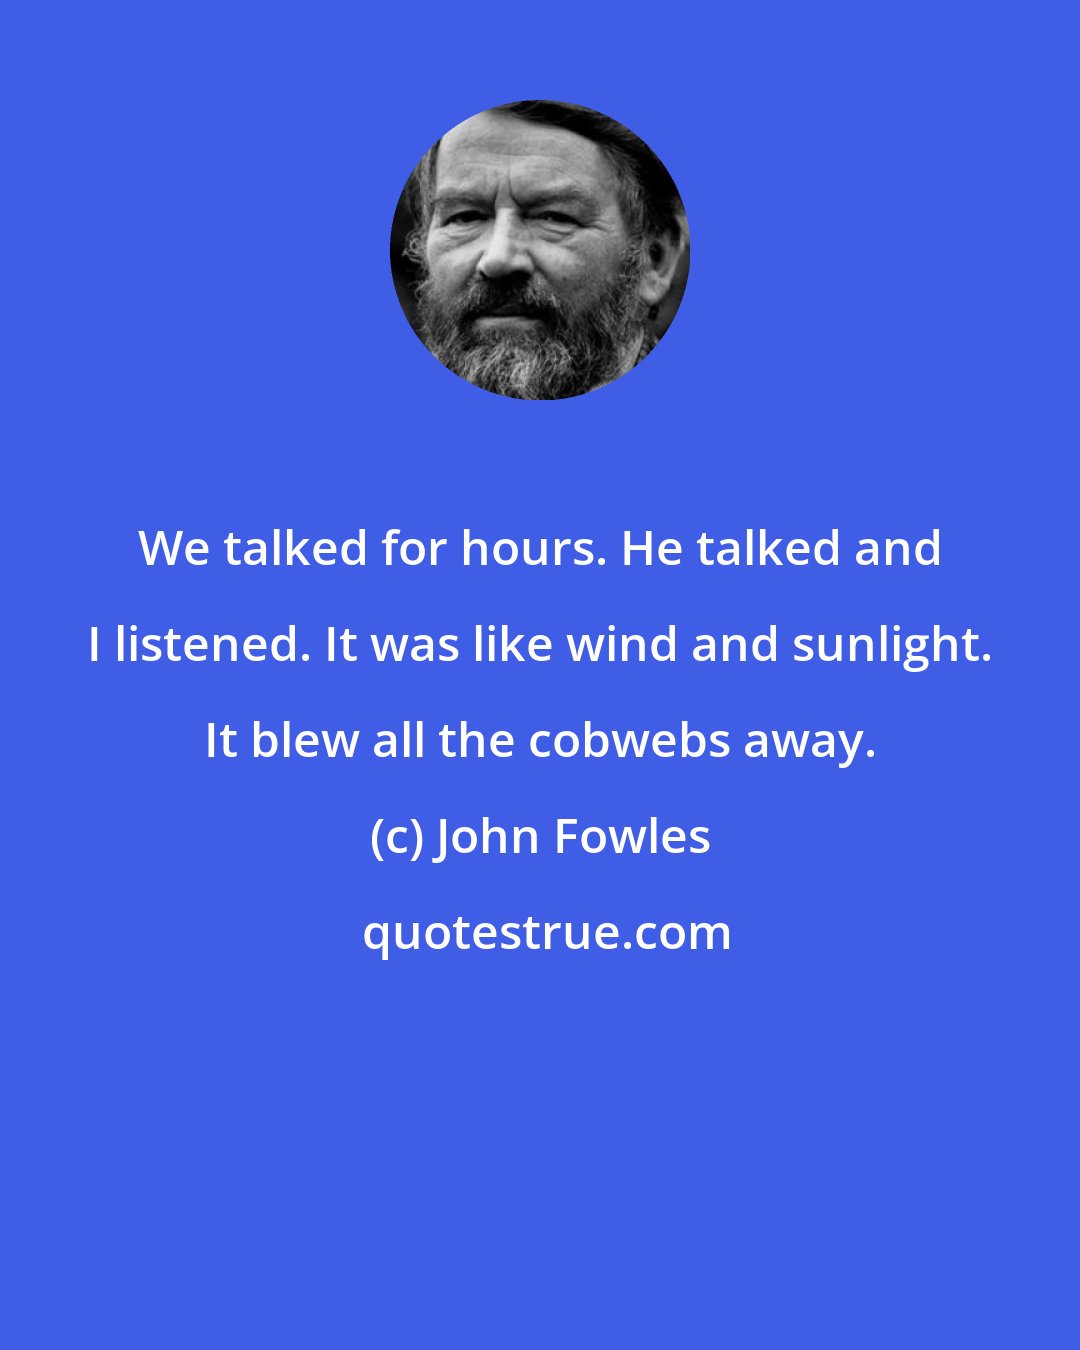 John Fowles: We talked for hours. He talked and I listened. It was like wind and sunlight. It blew all the cobwebs away.